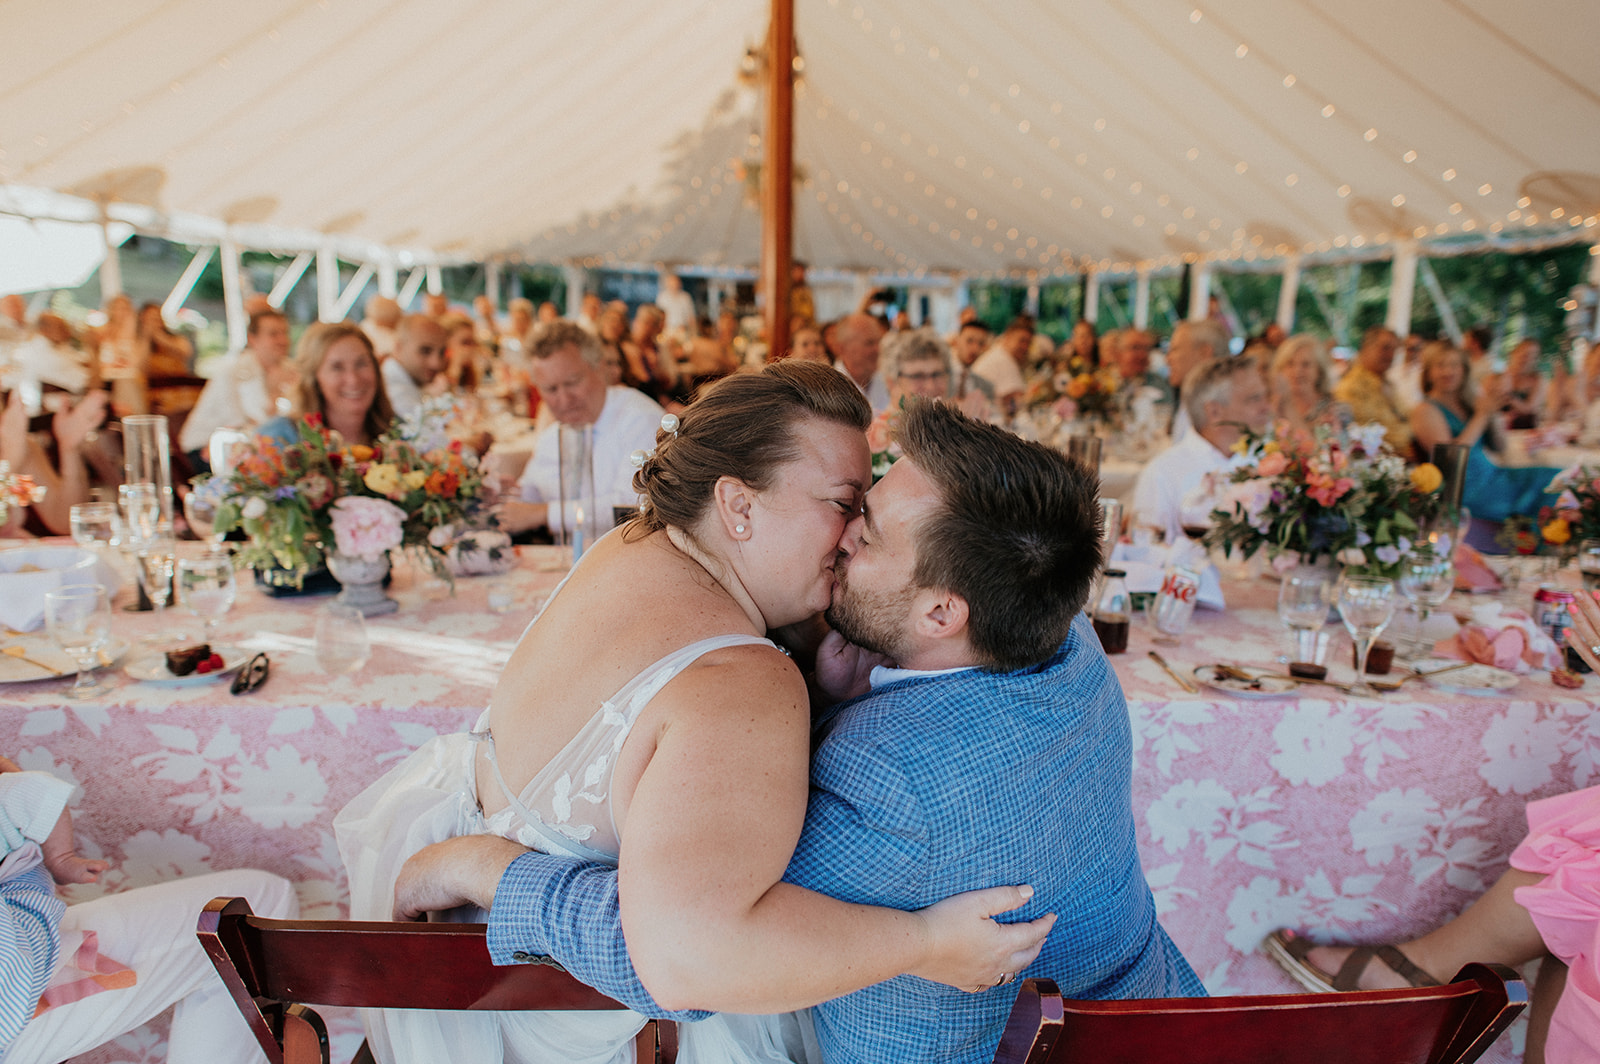 Bride and groom kiss during reception with guests behind them in the tent